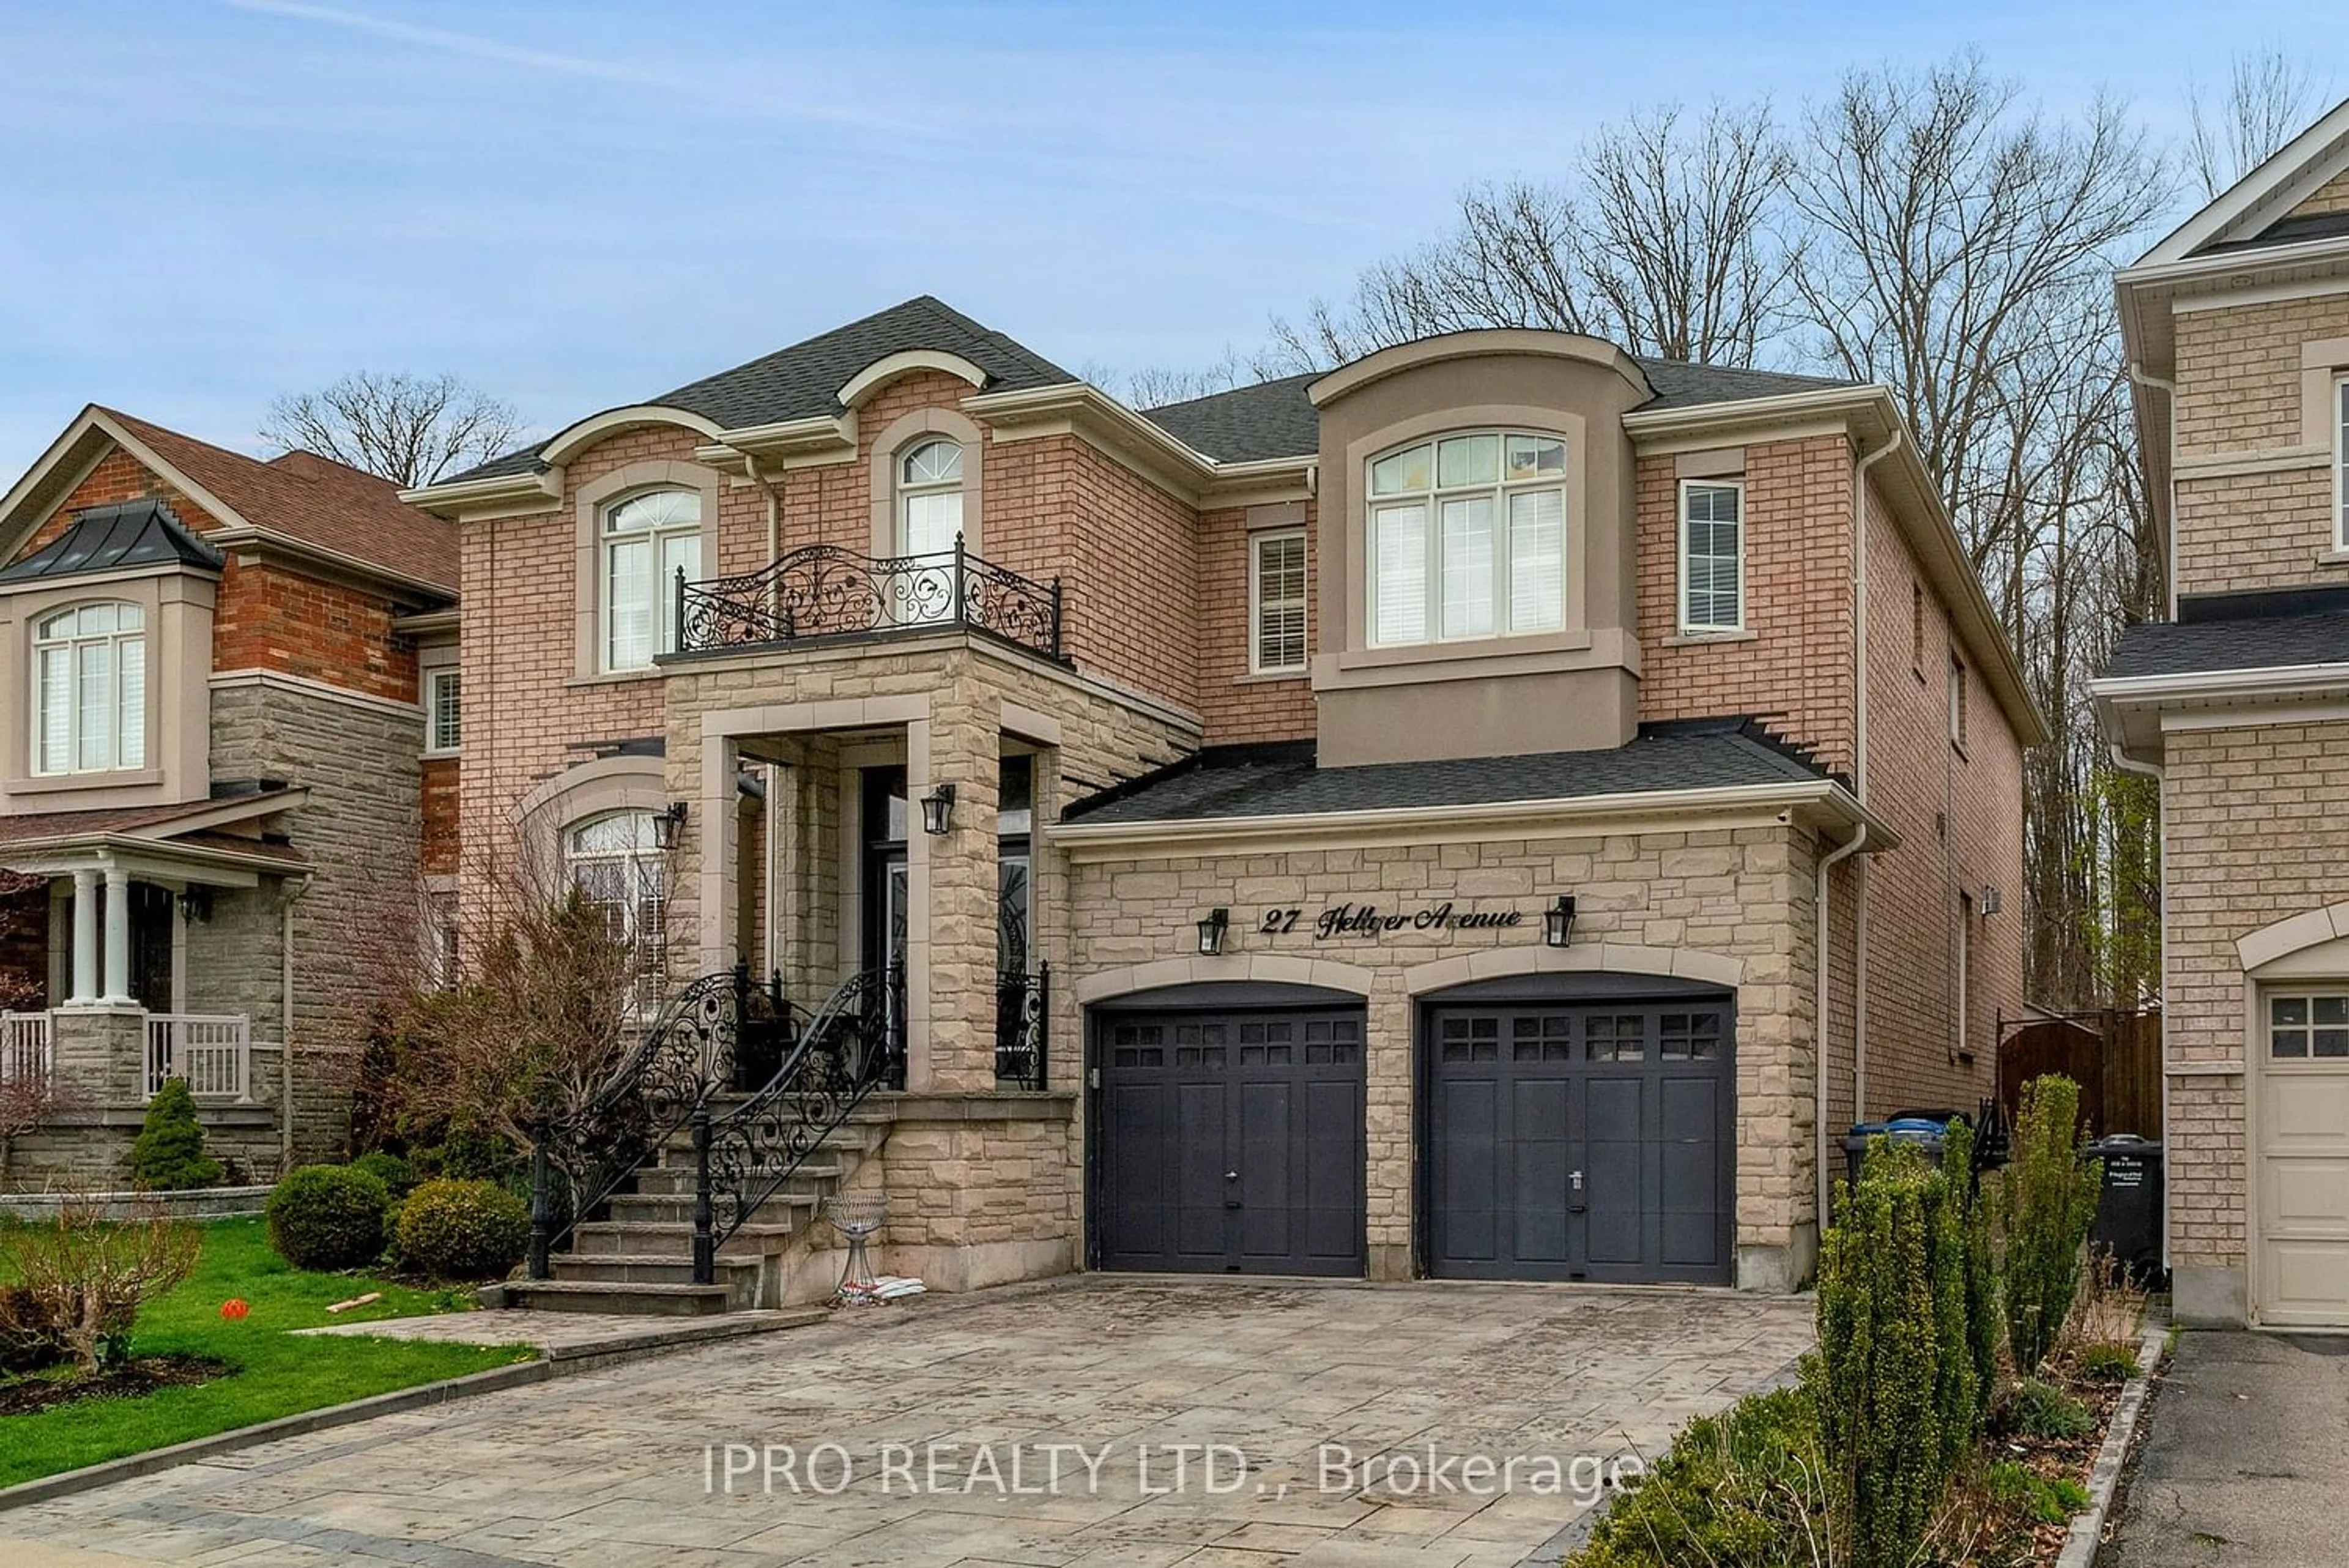 Home with brick exterior material for 27 Hellyer Ave, Brampton Ontario L6Y 0M3